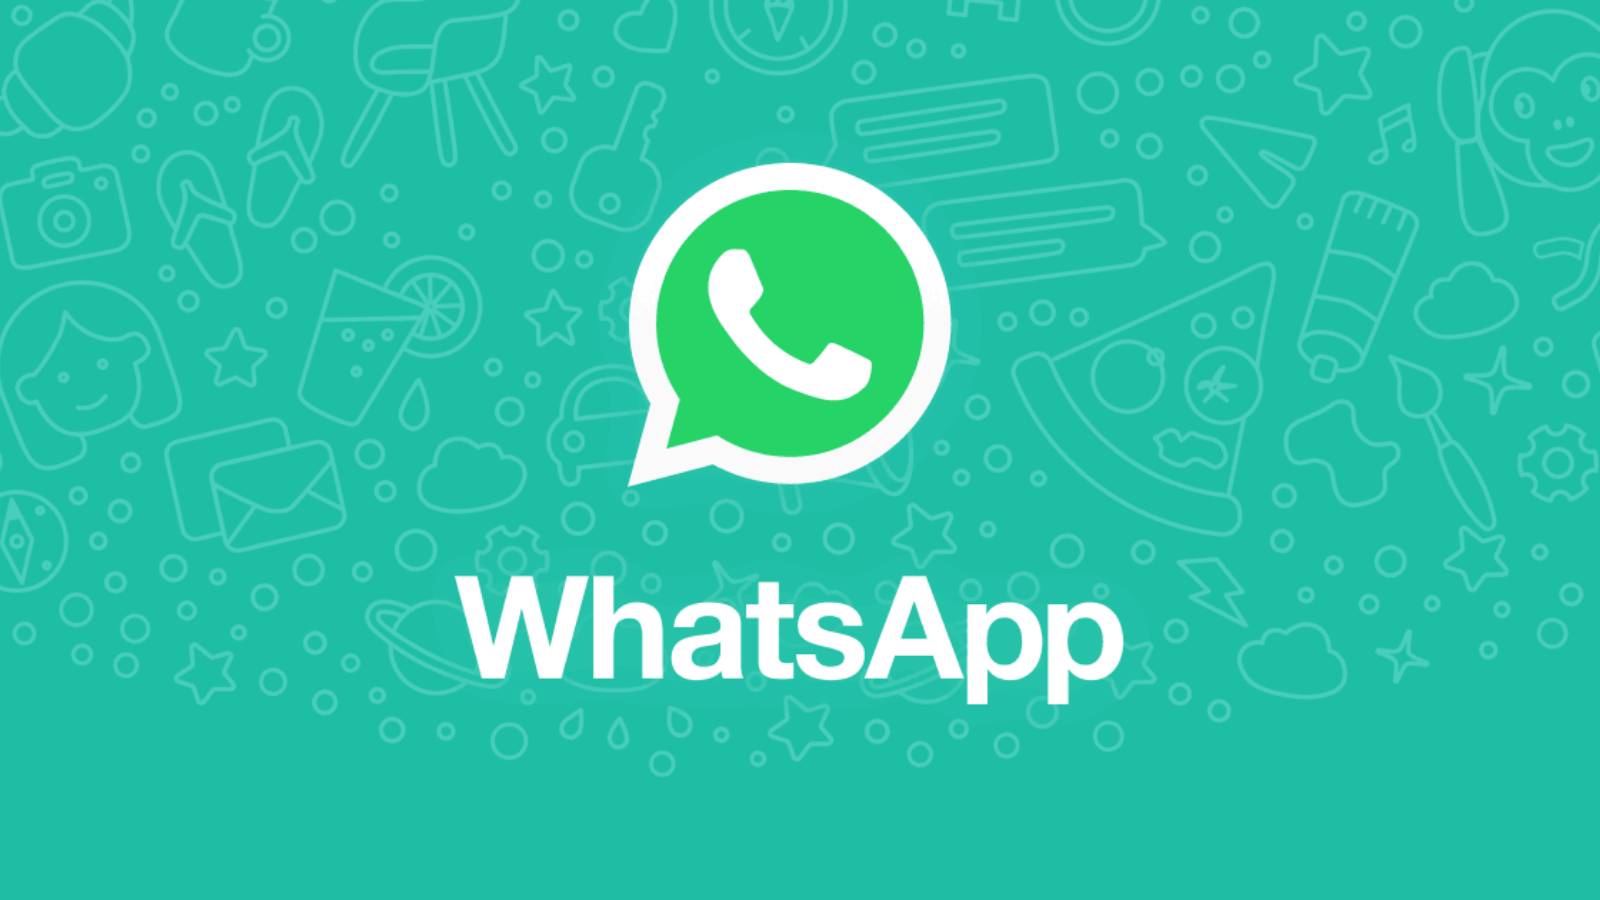 WhatsApp LANCERET opdatering Nyheder iPhone Android ankommer